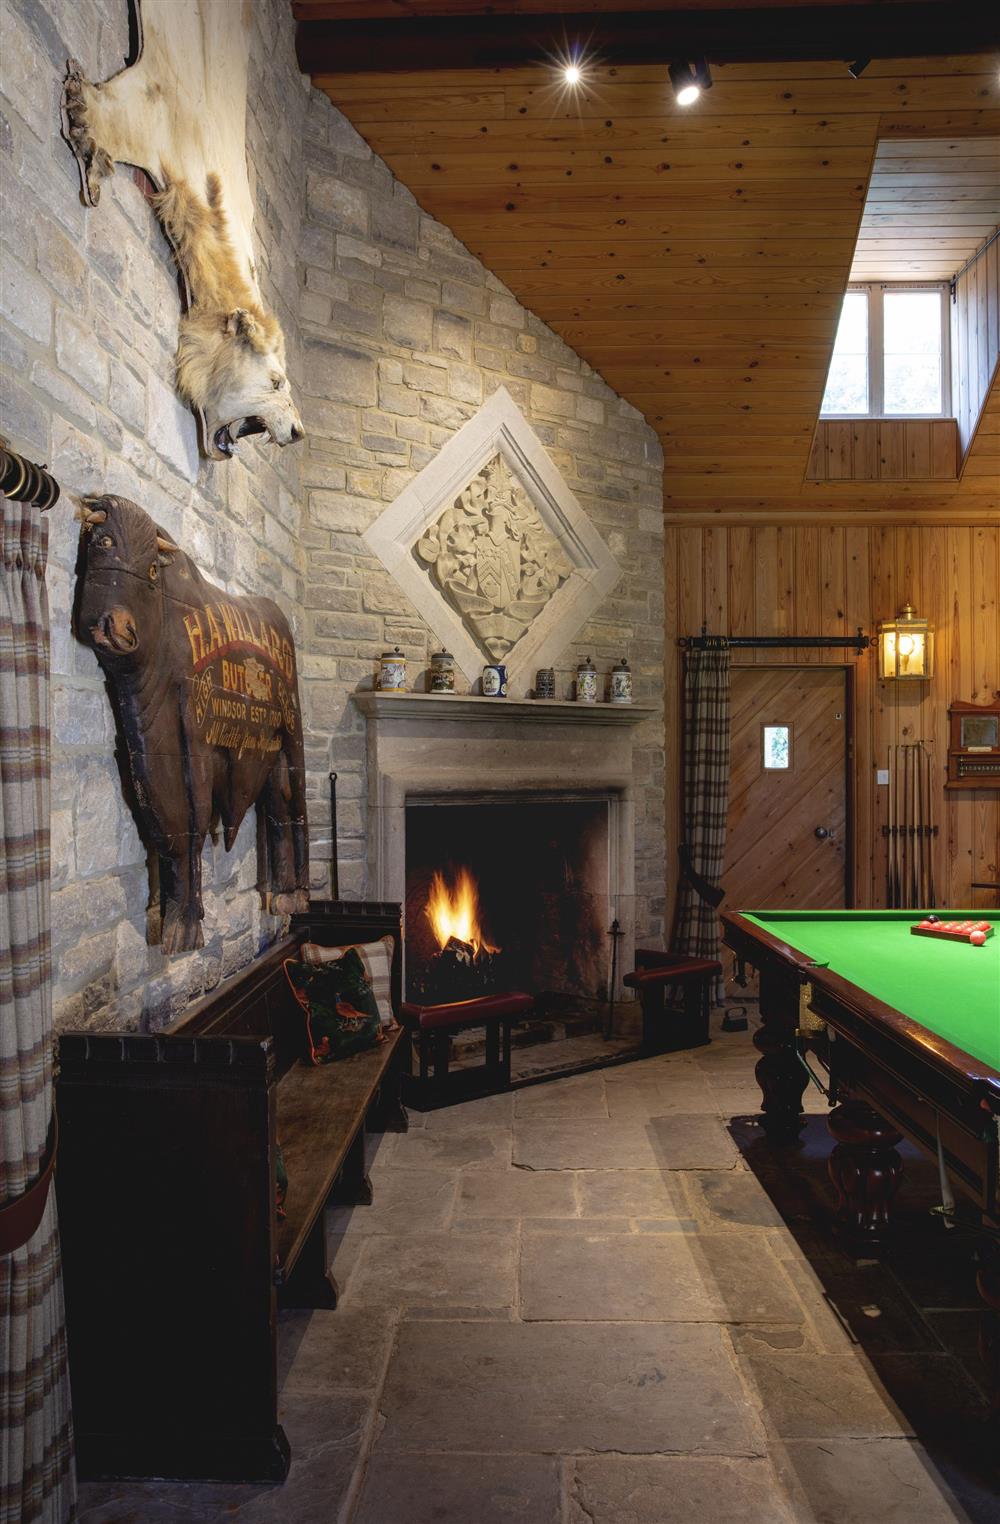 The Billiard Room is a wonderful sociable space at The Shooting Lodge, Dorset